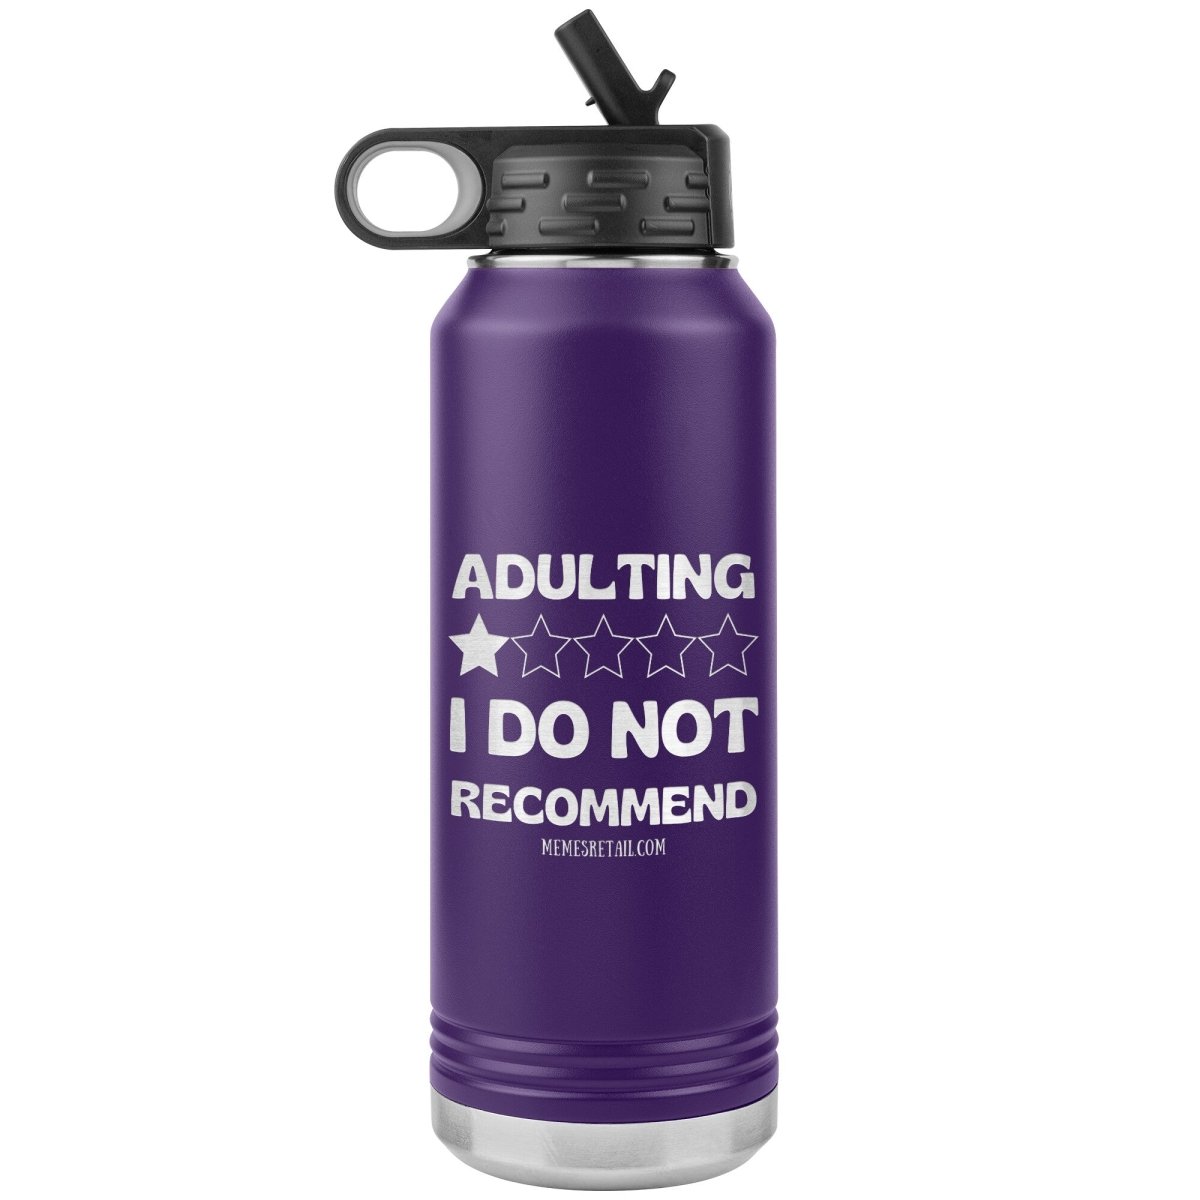 Adulting, 1 Star, I do not recommend 32oz Water Tumblers, Purple - MemesRetail.com